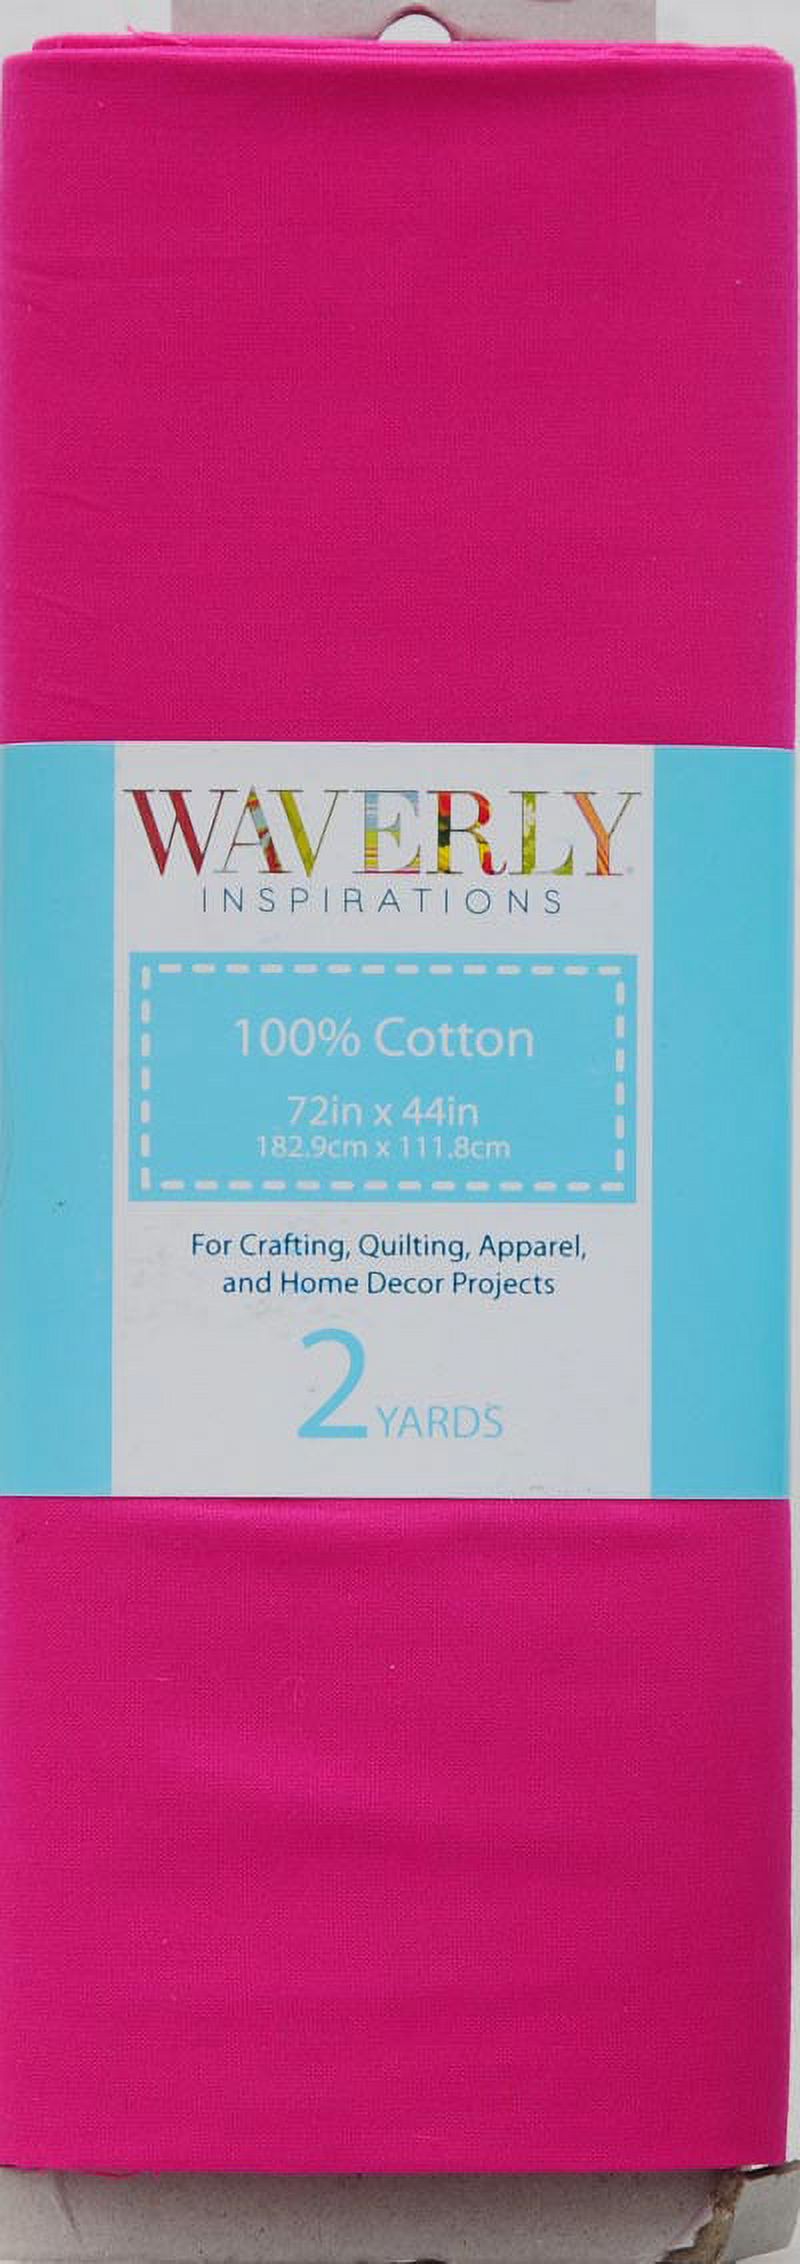 Waverly Inspirations 100% Cotton 44" Solid Magenta Color Sewing Fabric by the Yard - image 2 of 2